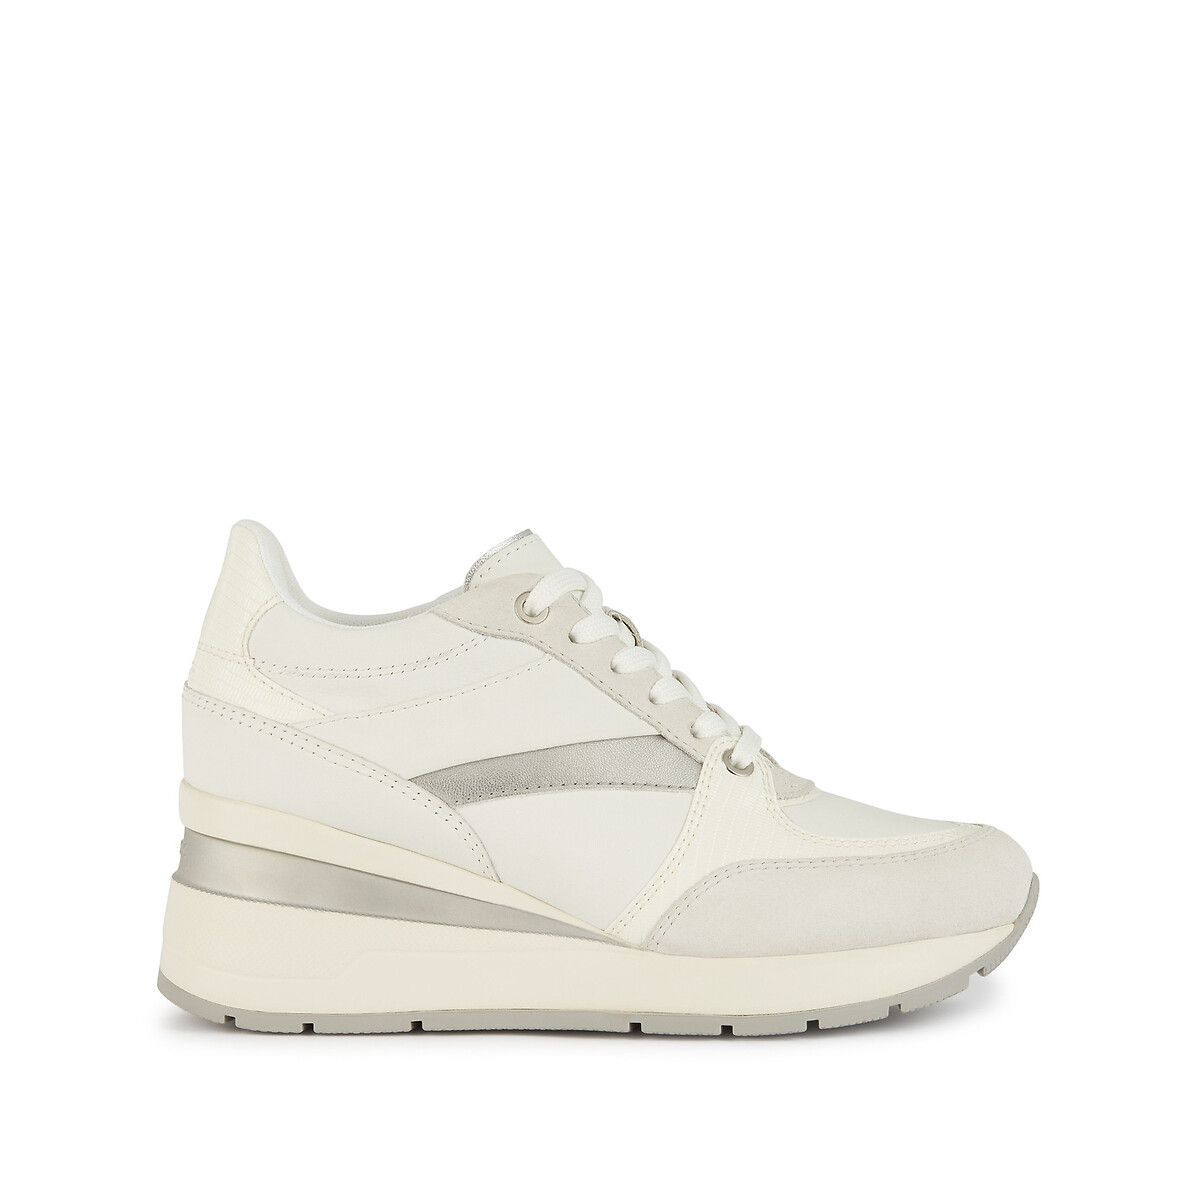 Zosma Leather Breathable Trainers with Wedge Heel